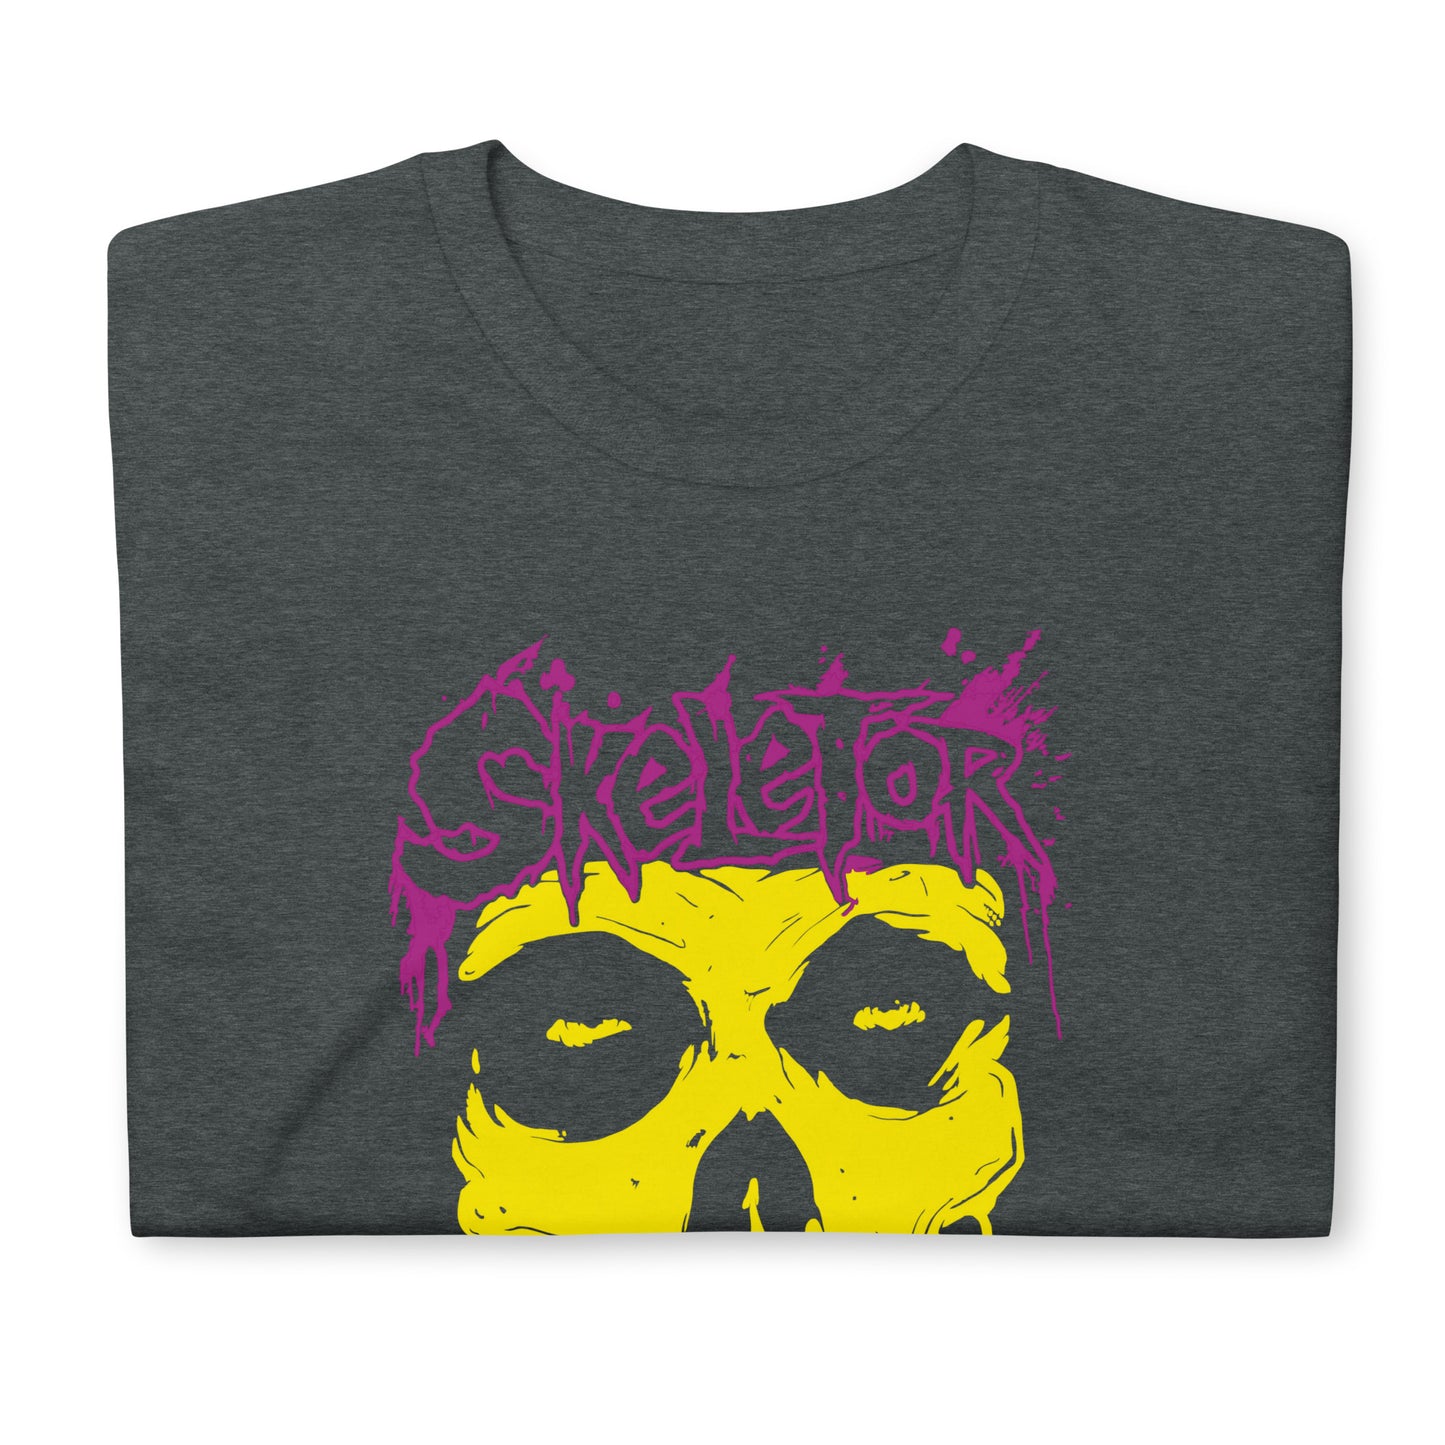 Skeletor T-Shirt, Masters of the Universe.